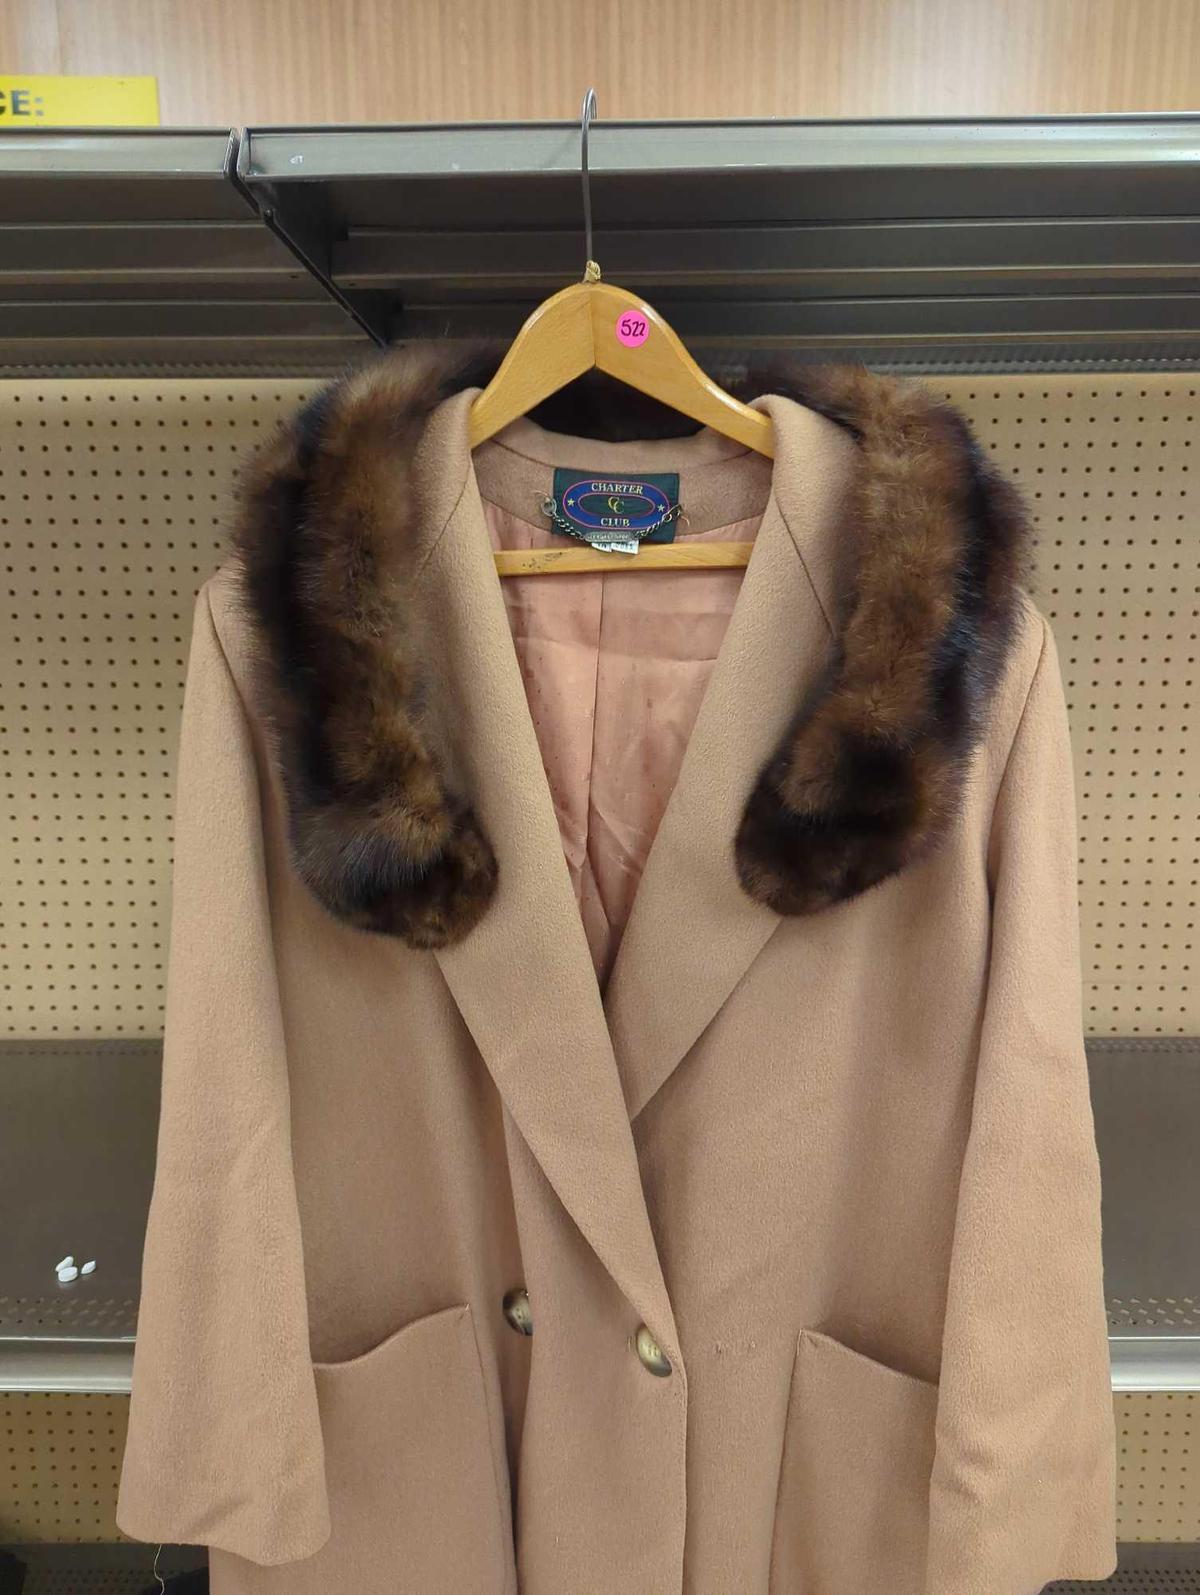 Charter Club Women's Size 14 Khaki Wool Long Over Coat With A Detachable Clip On Fur Collar, Unsure